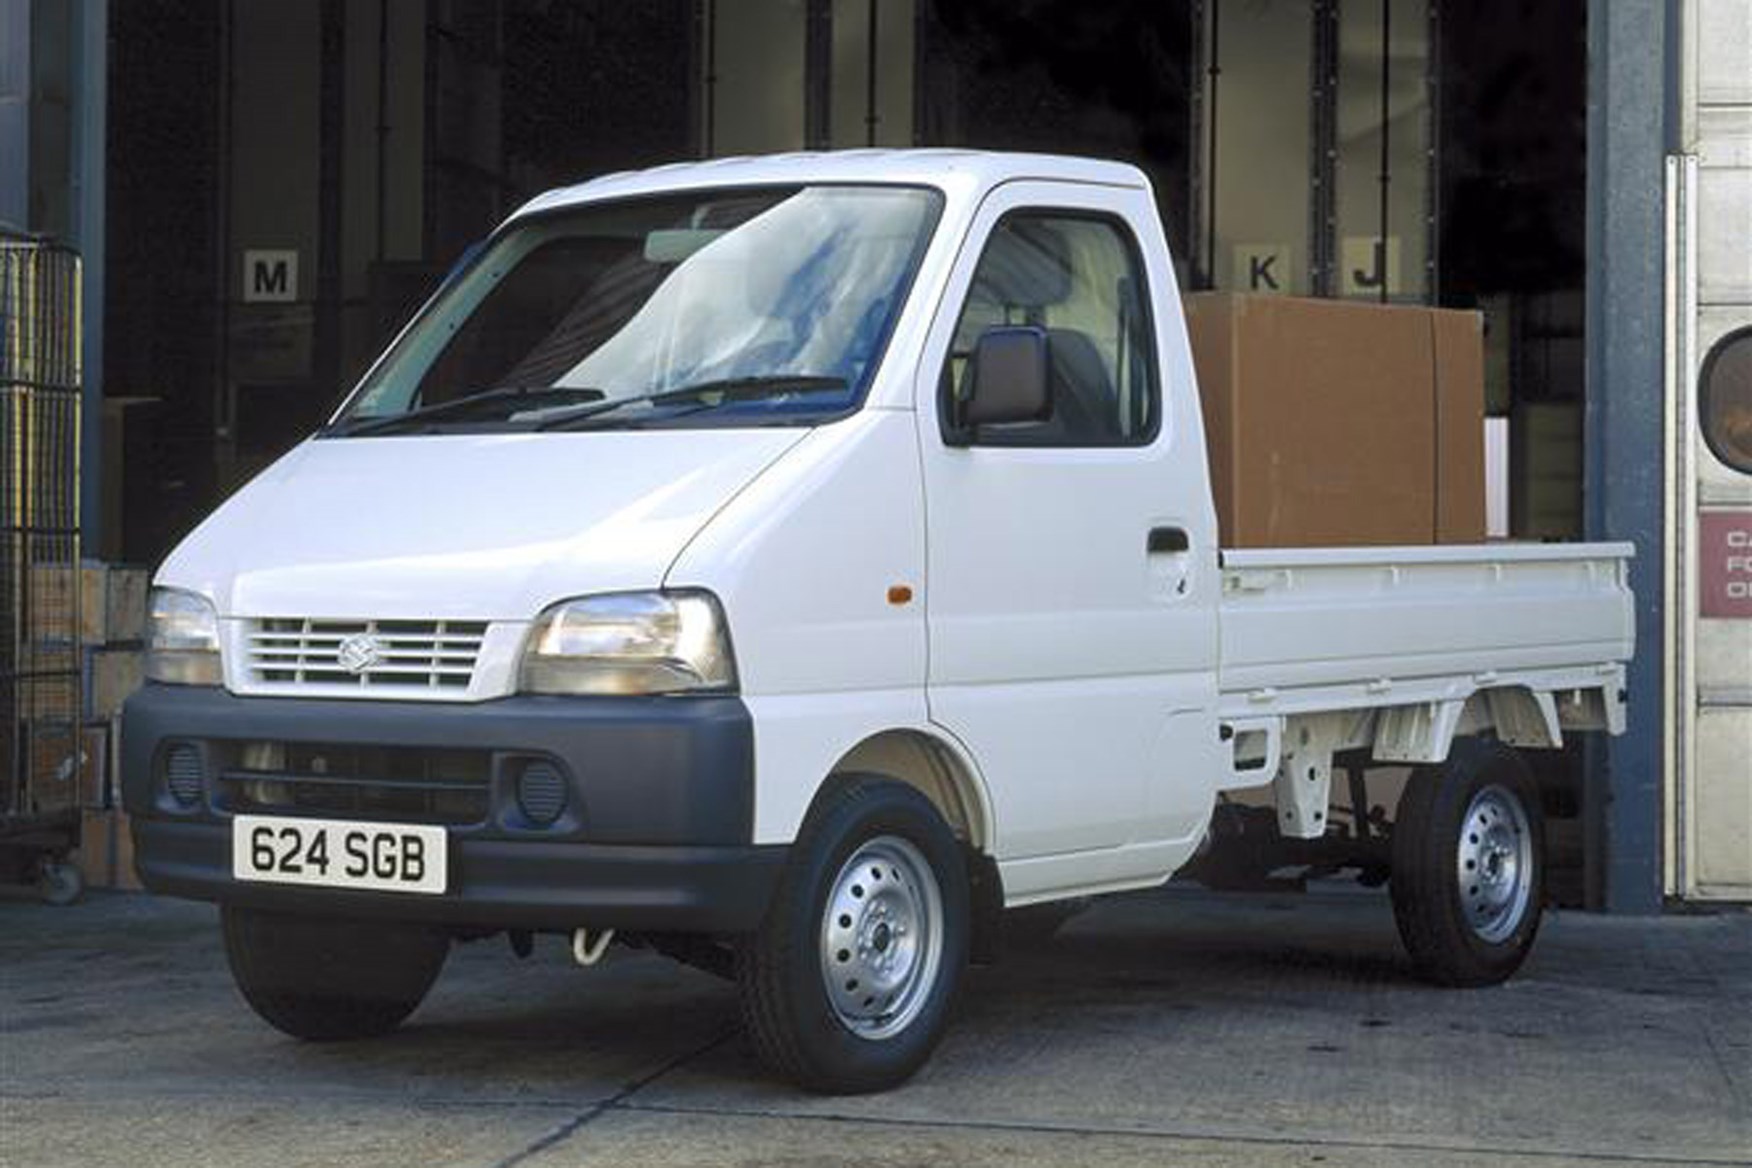 Suzuki Carry review on Parkers Vans - pickup version